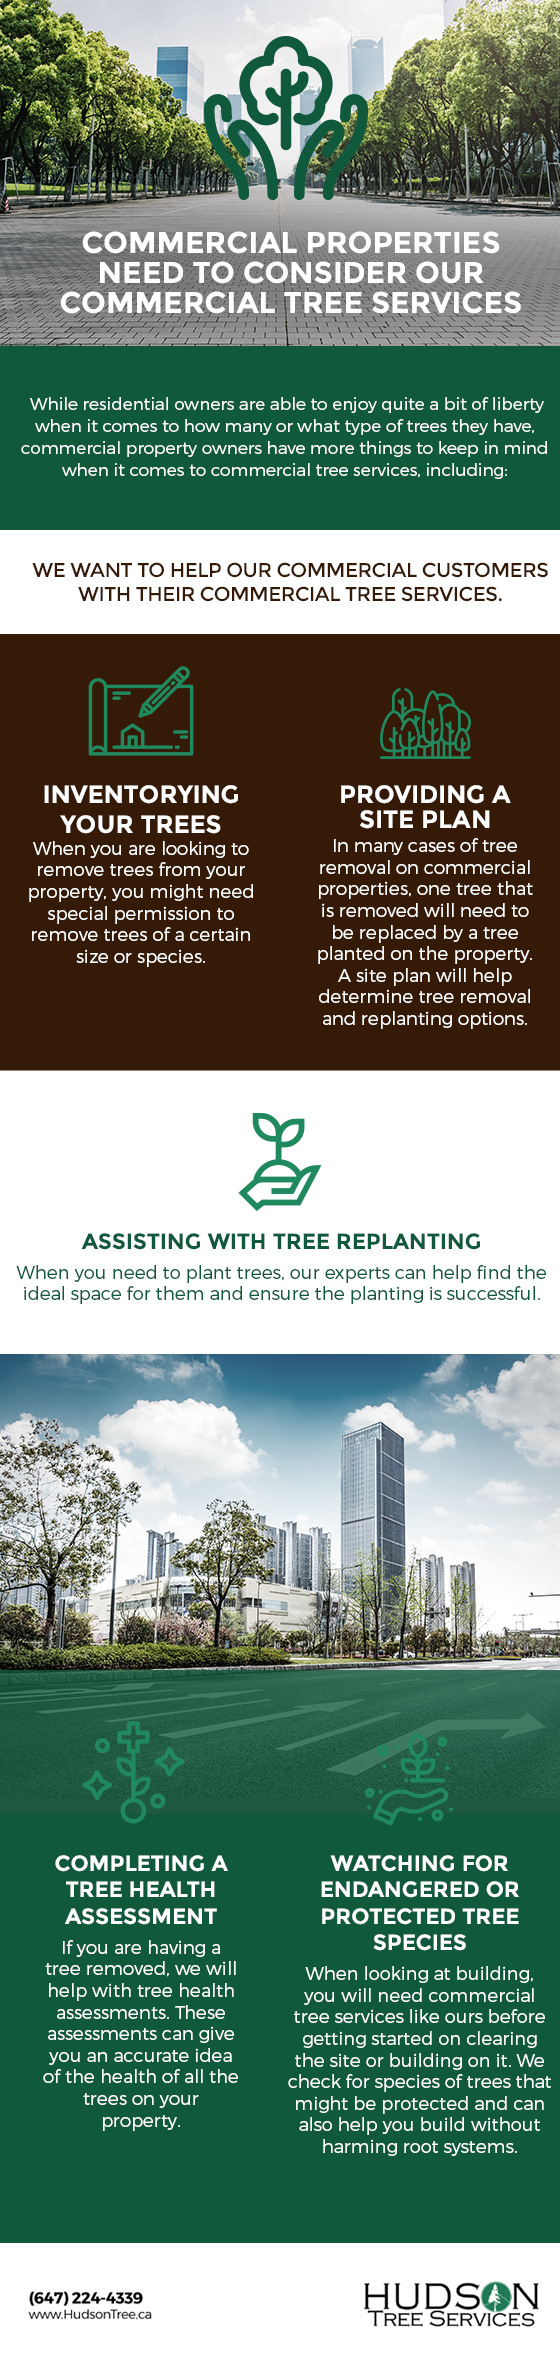 Commercial Properties Need to Consider Our Commercial Tree Services [infographic]